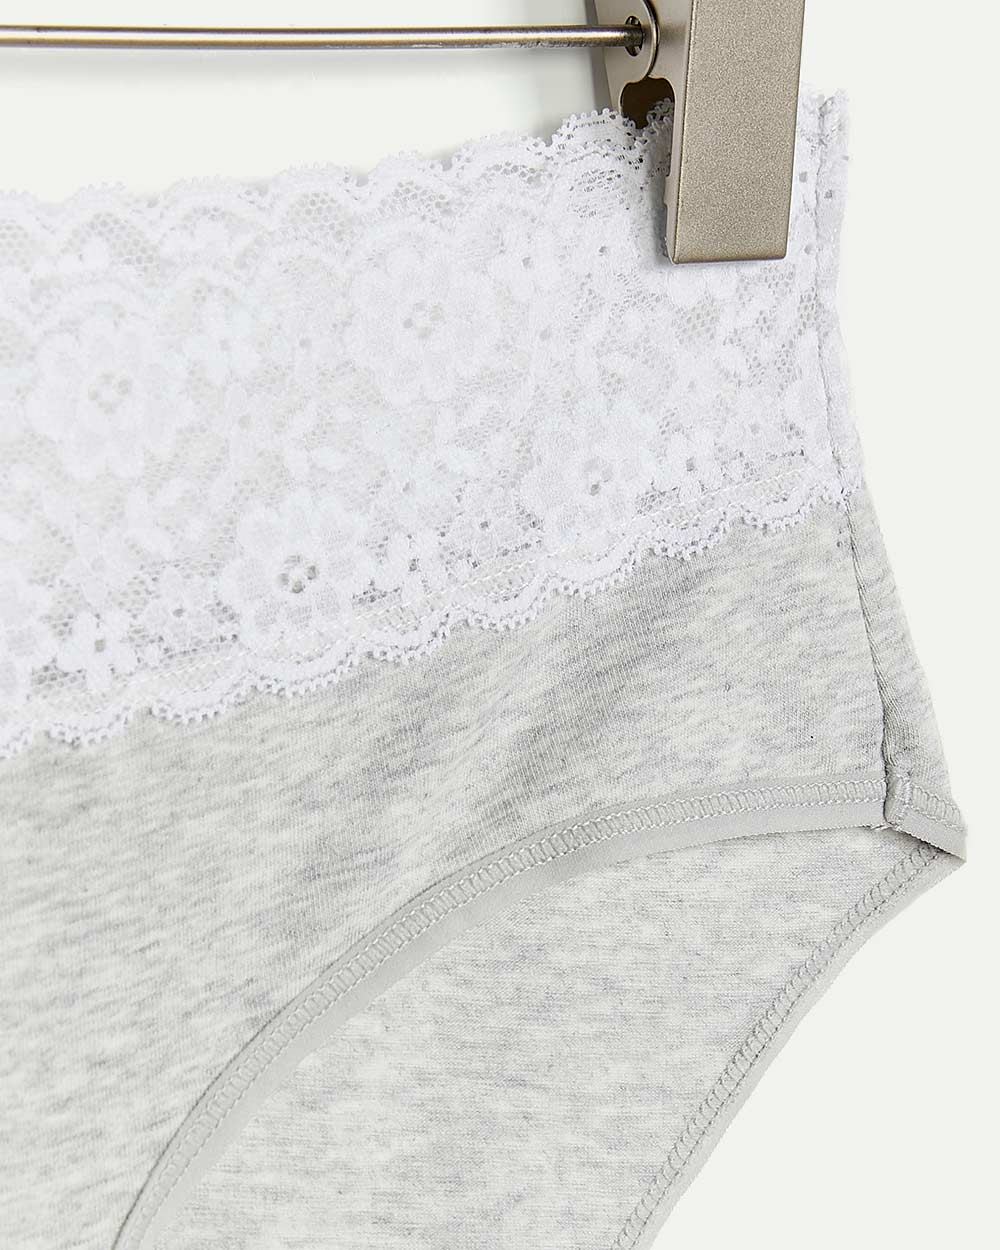 Cotton Hipster Panty with Lace